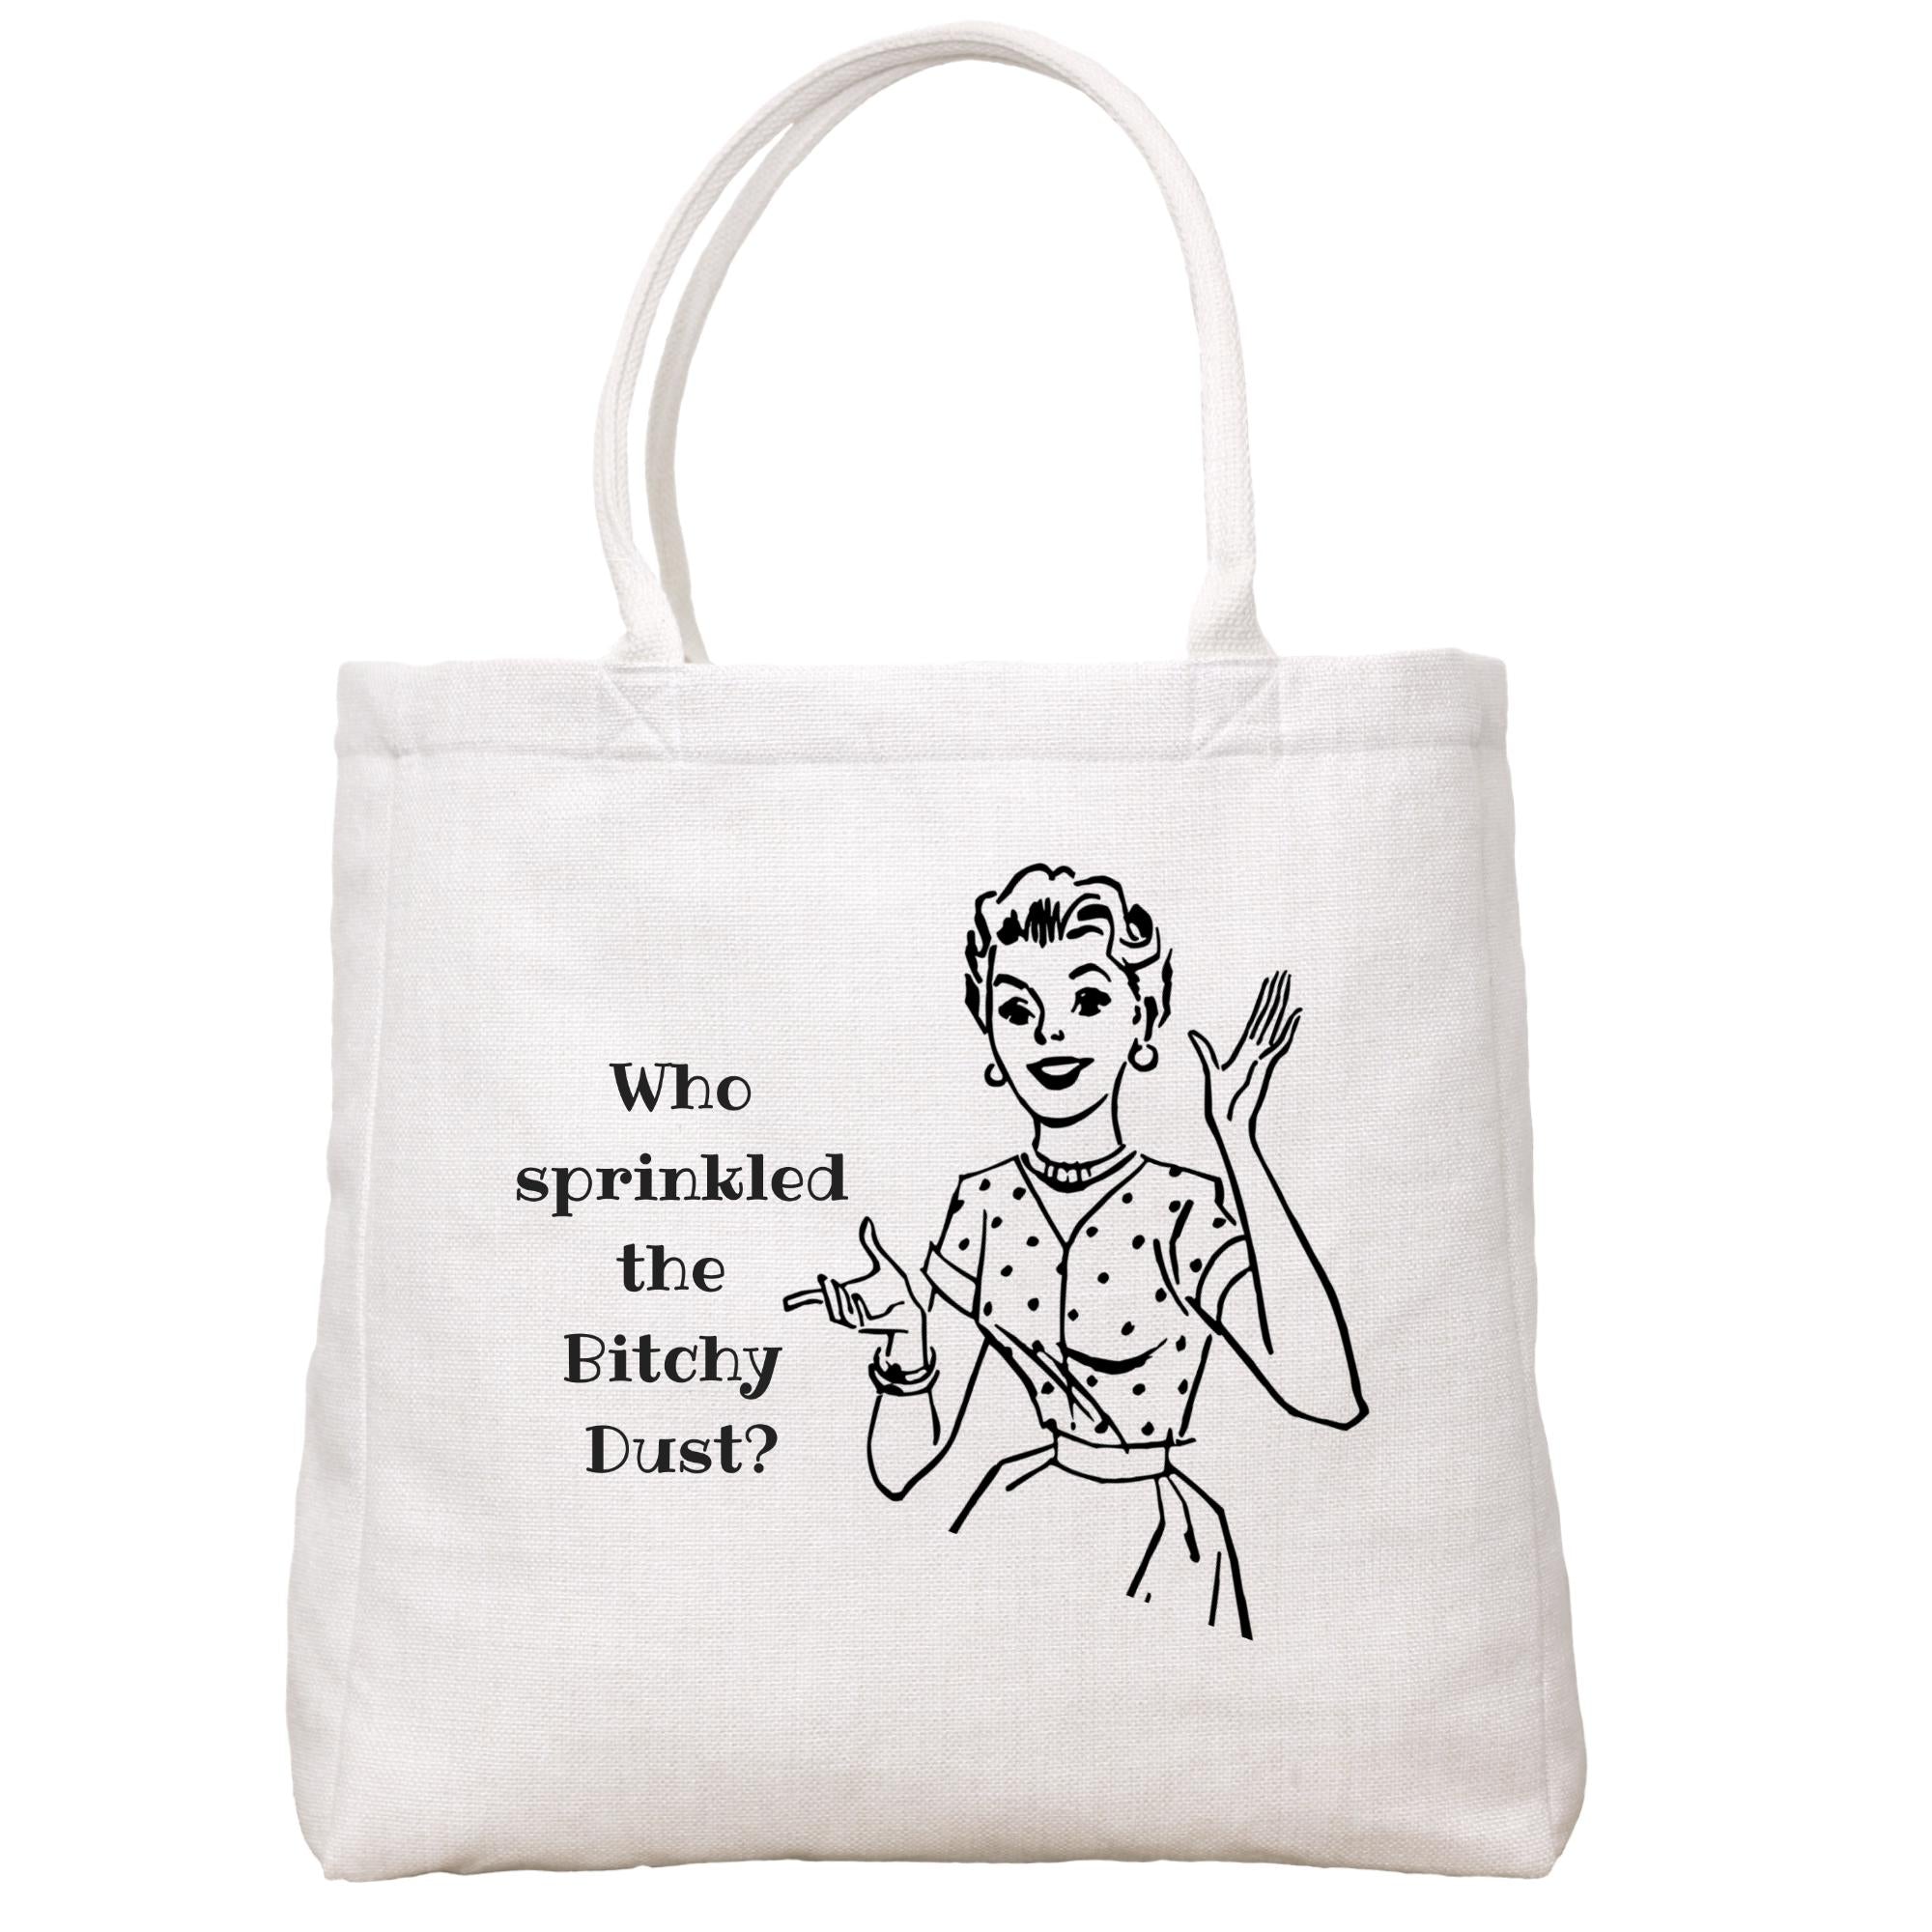 Bitchy Dust Tote Bag Tote Bag - Southern Sisters